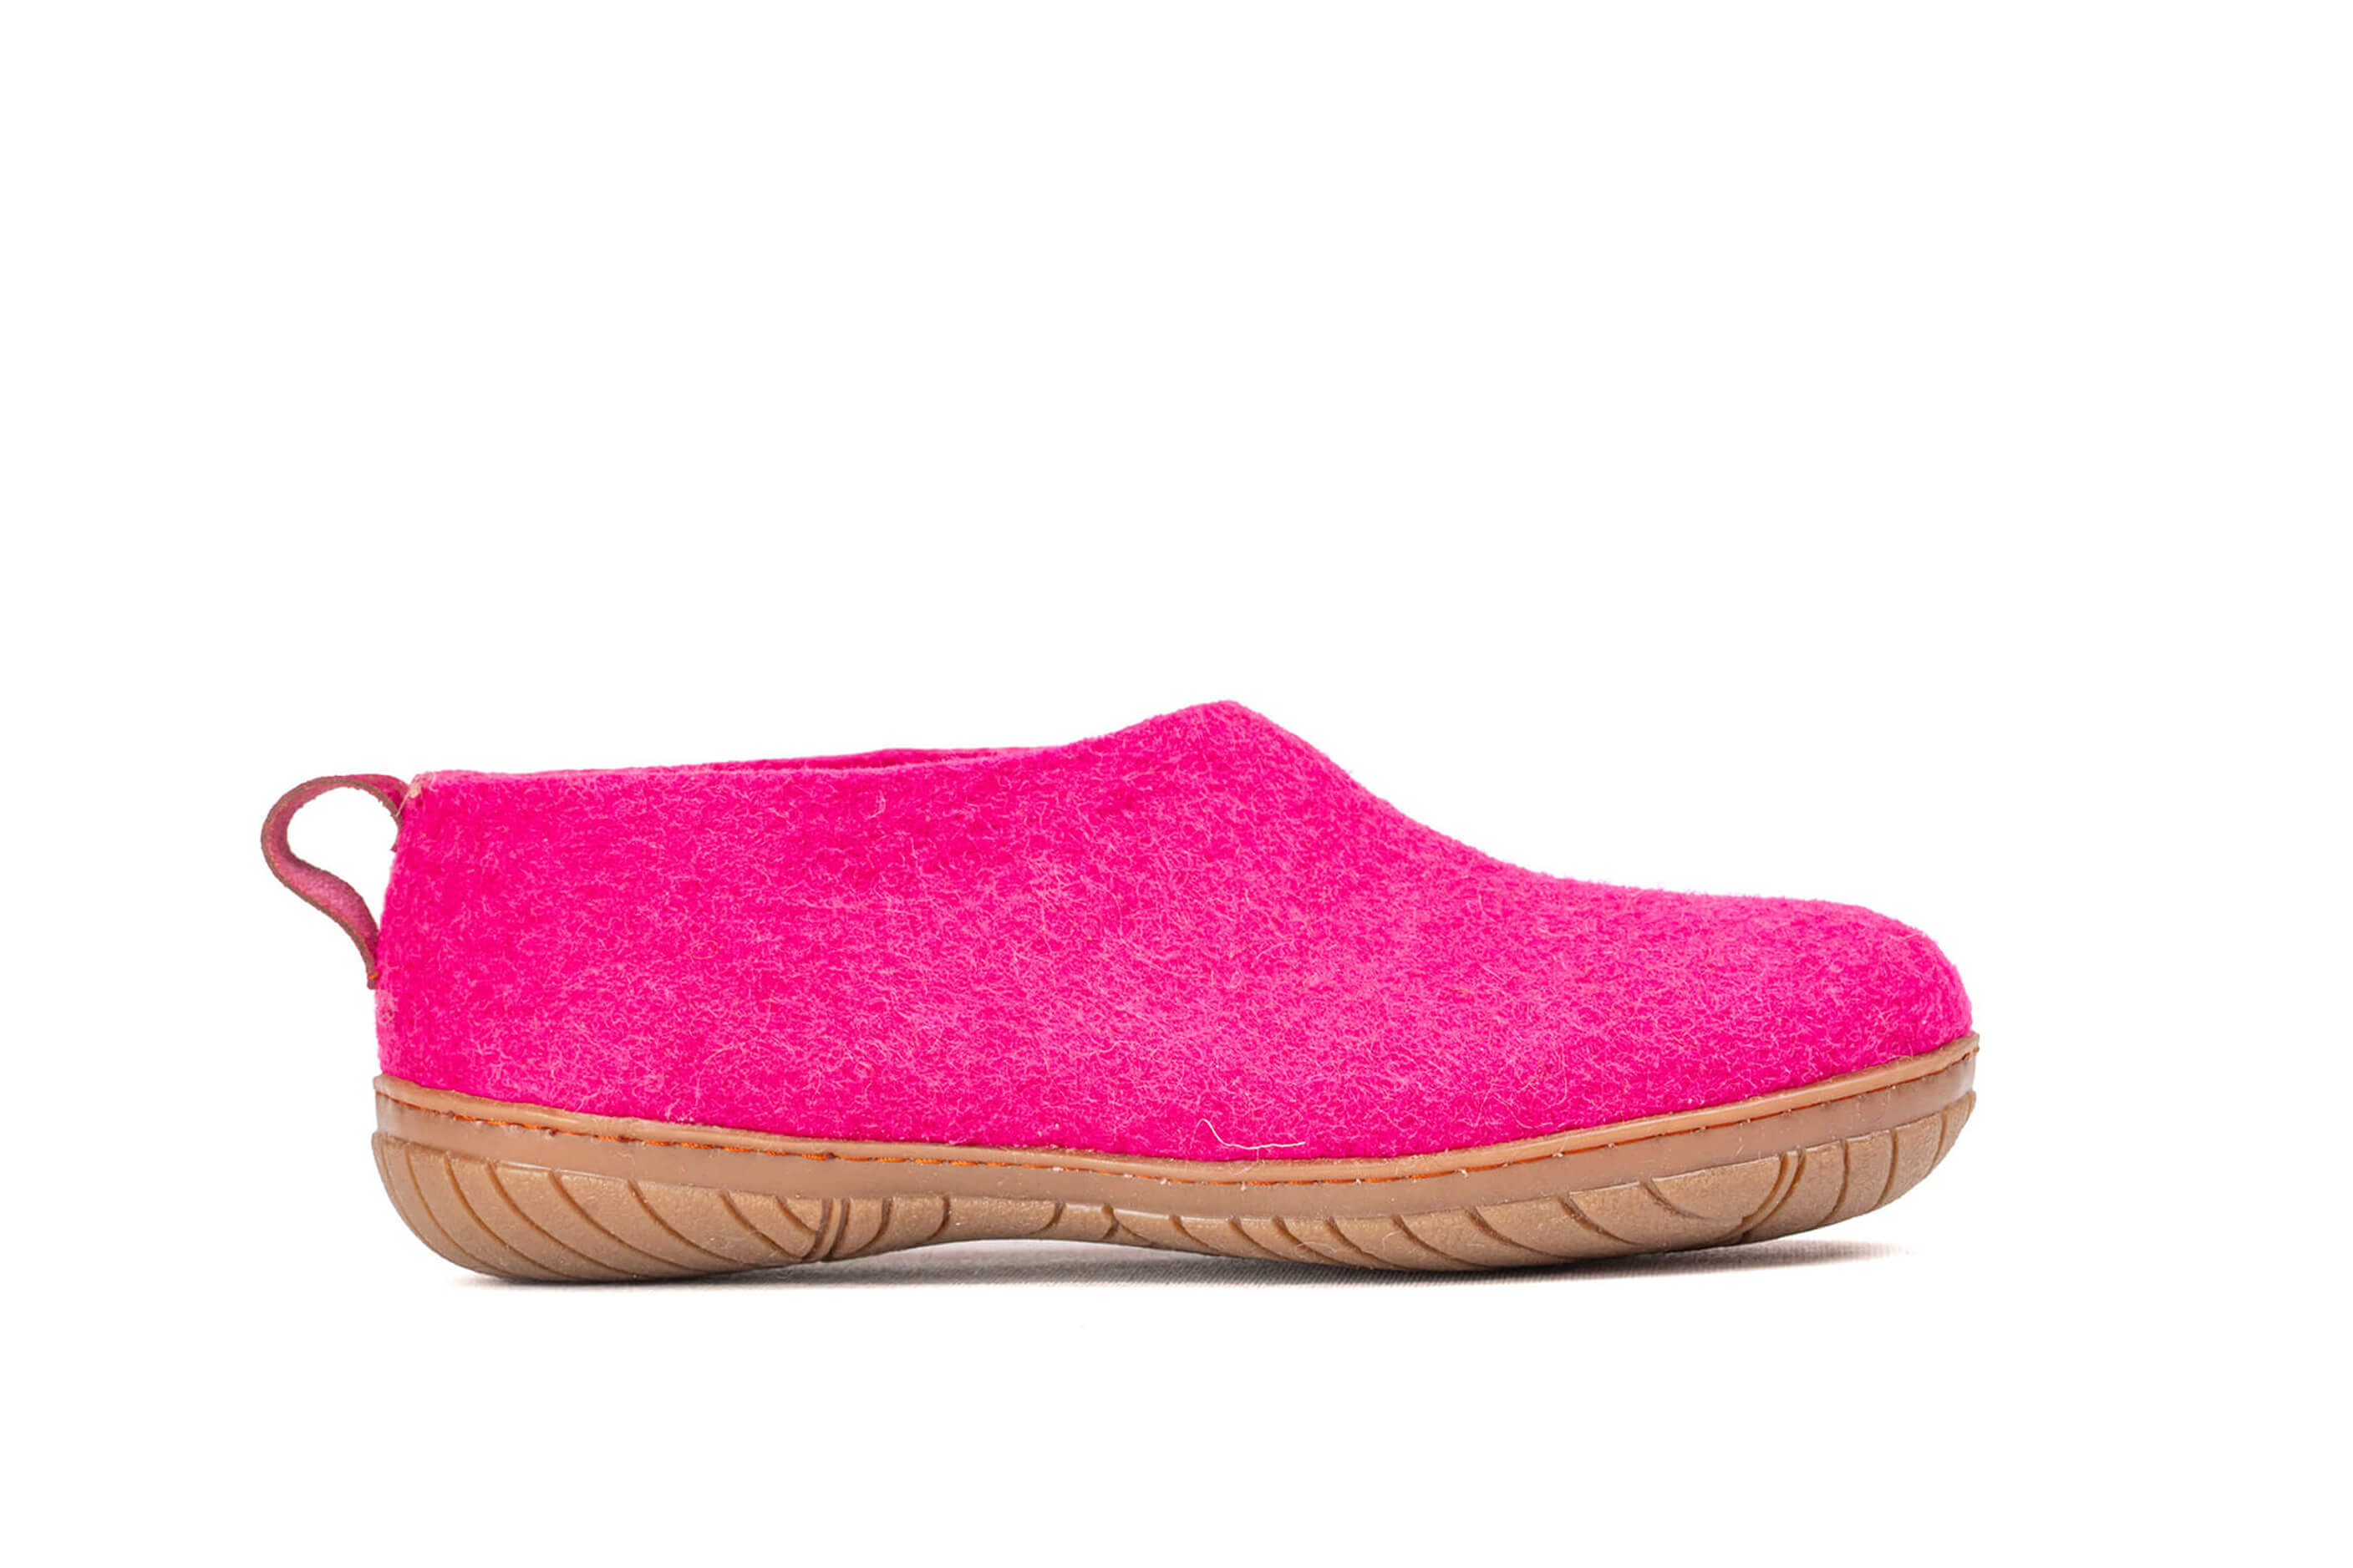 Outdoor Shoes With Rubber Sole - Fuchsia